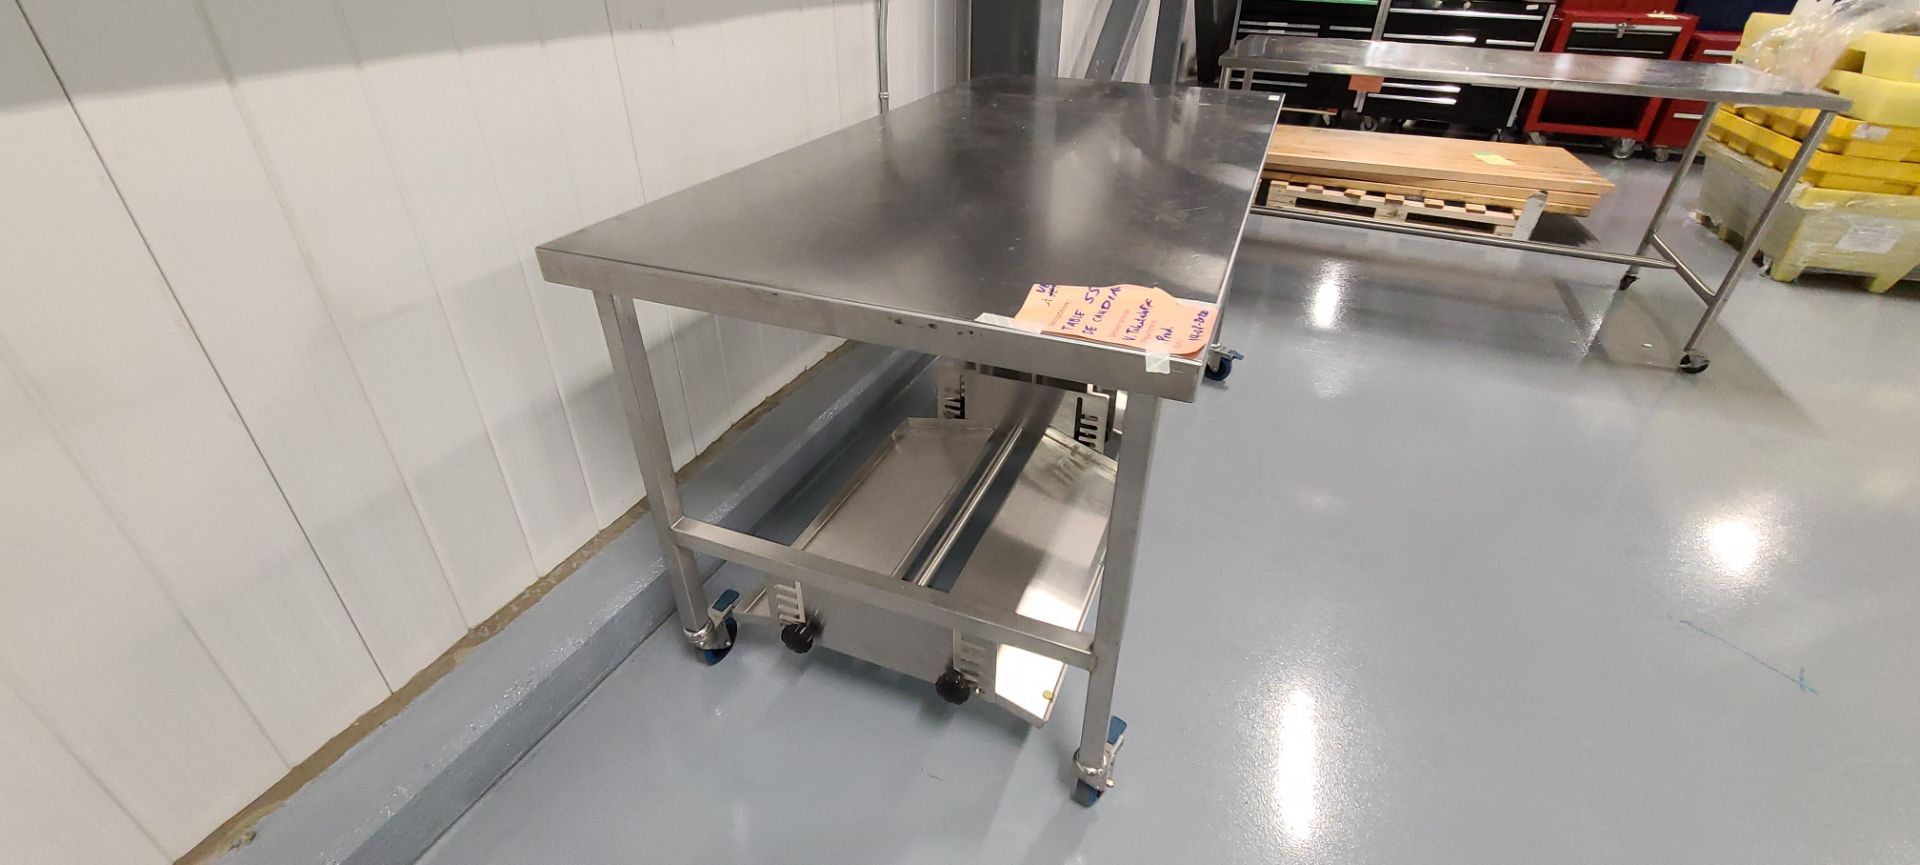 Stainless Steel Table w/ Casters - Image 9 of 10